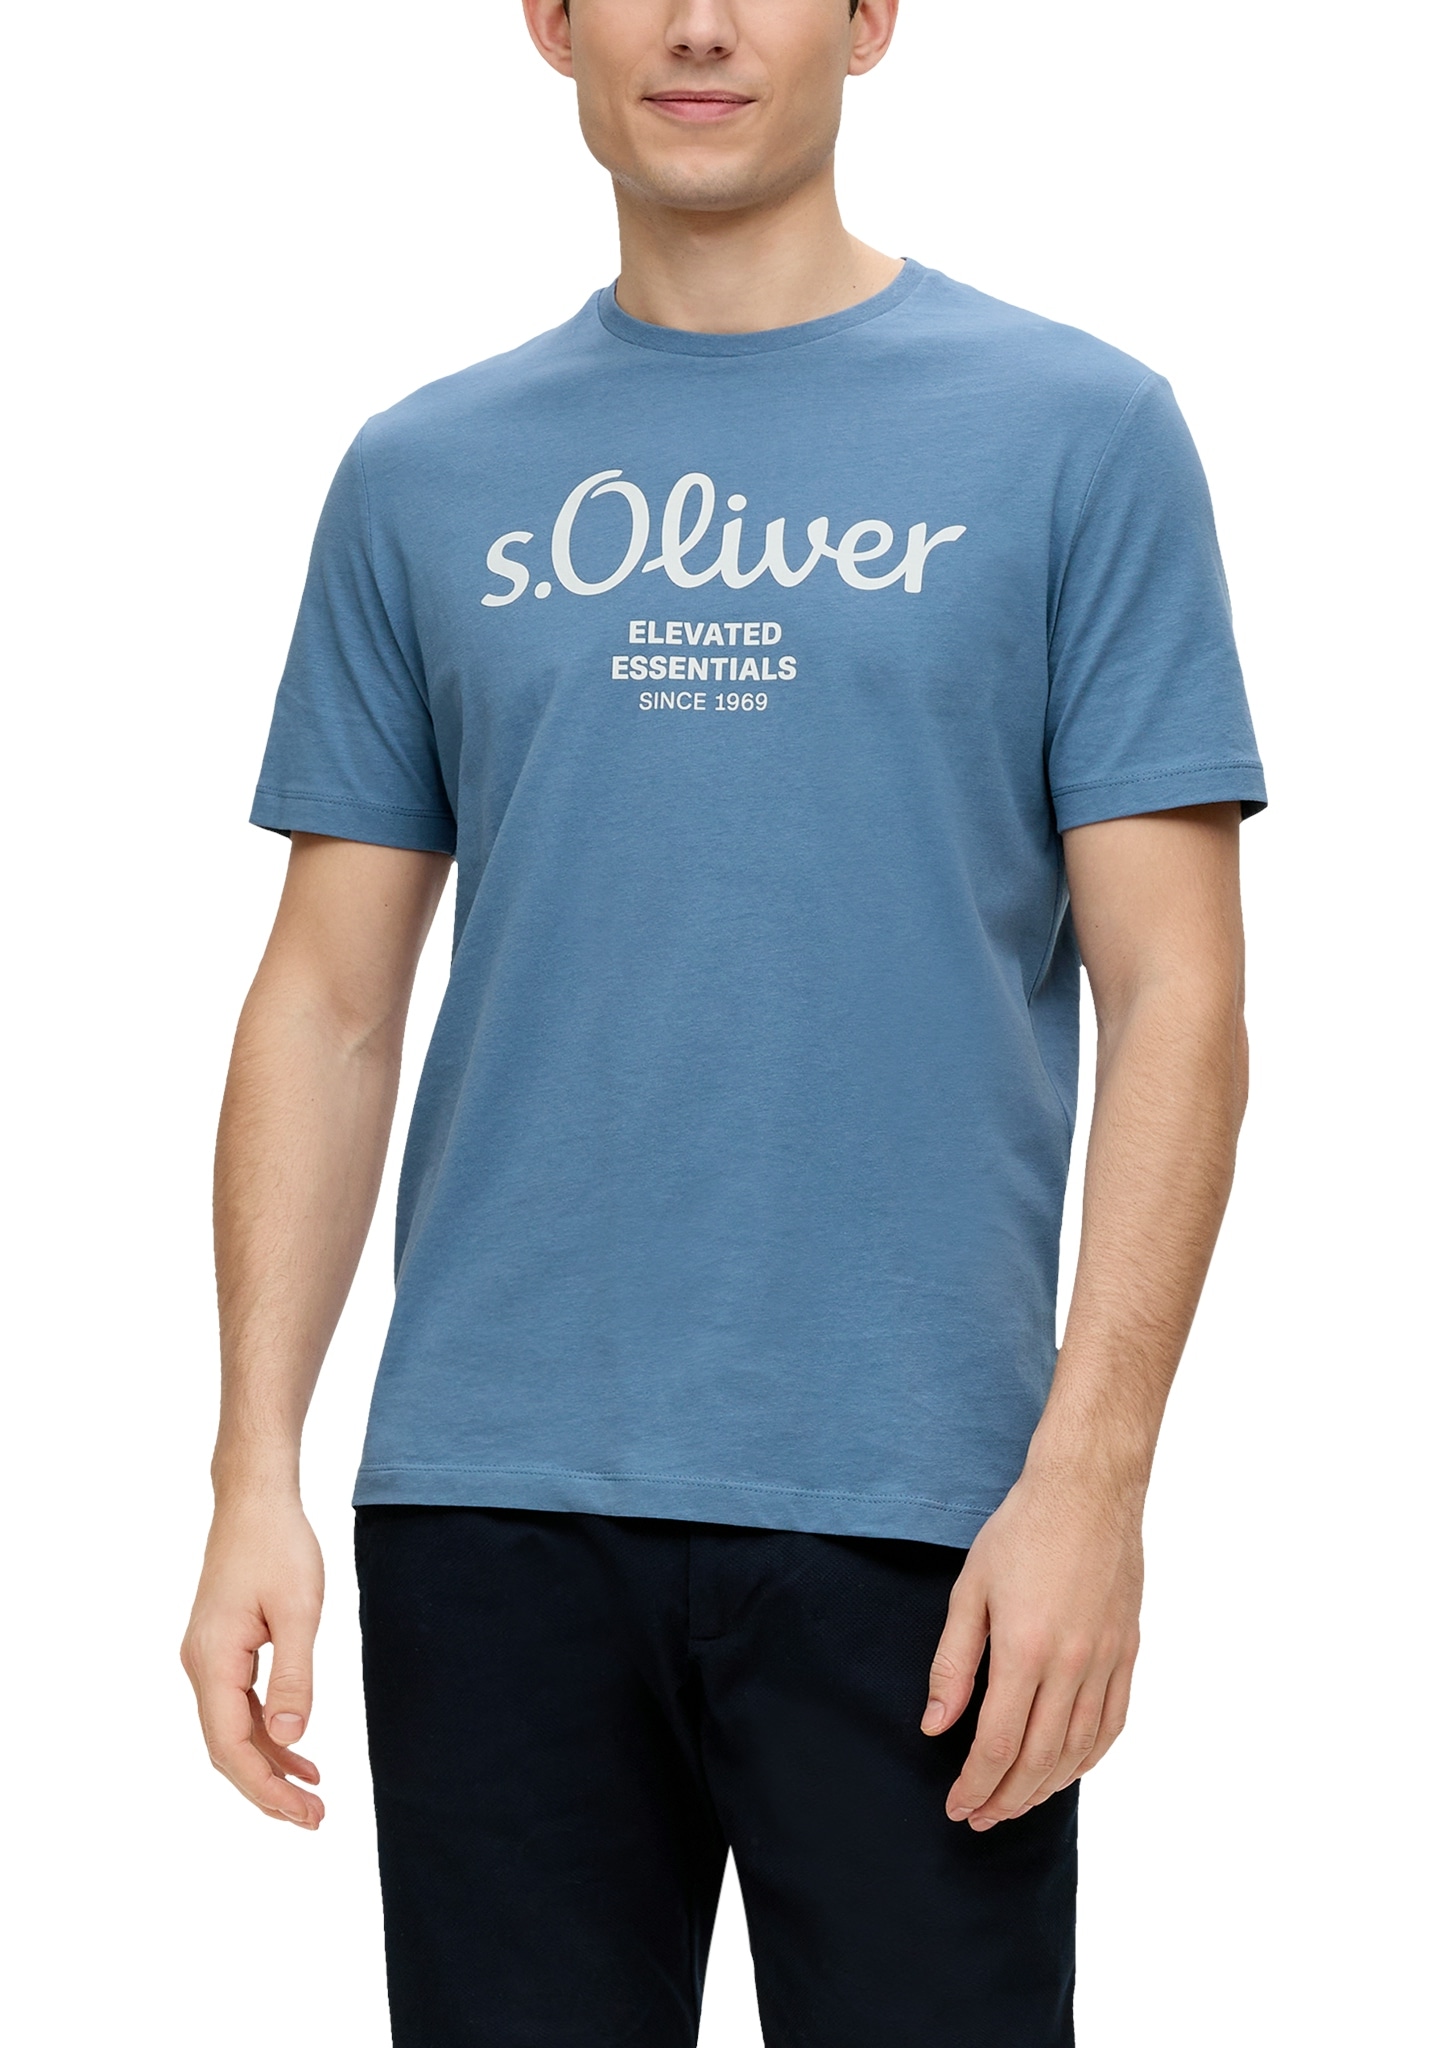 s.Oliver T-Shirt, im sportiven Look online bei OTTO